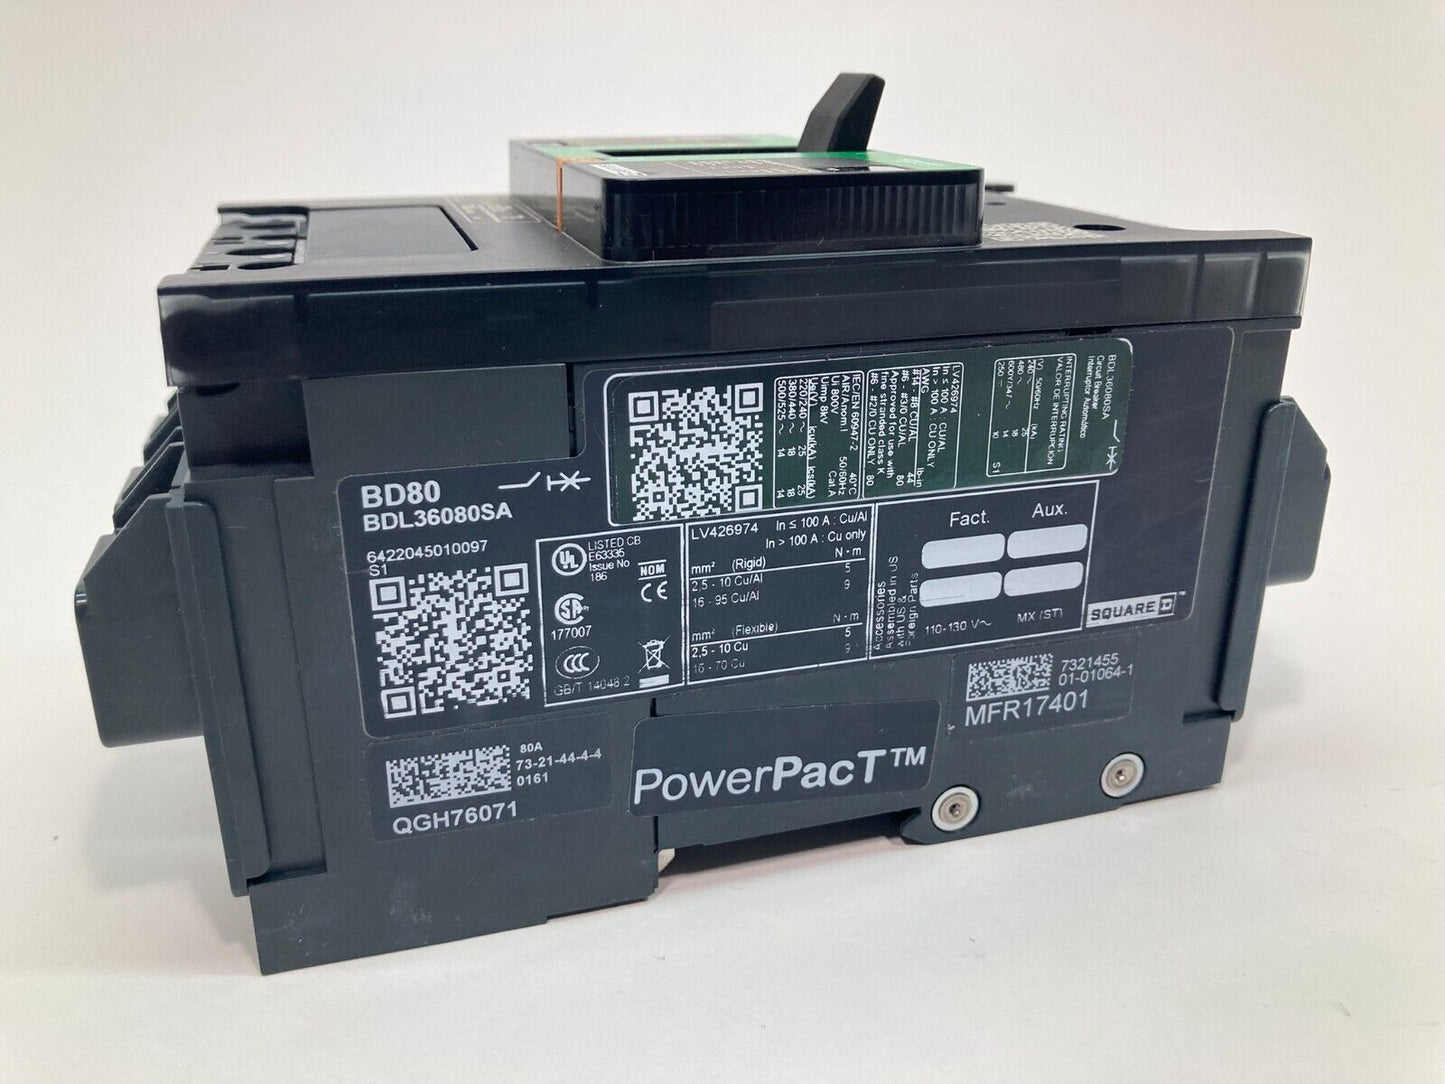 New SCHNEIDER ELECTRIC BDL36080SA PowerPacT Circuit Breaker